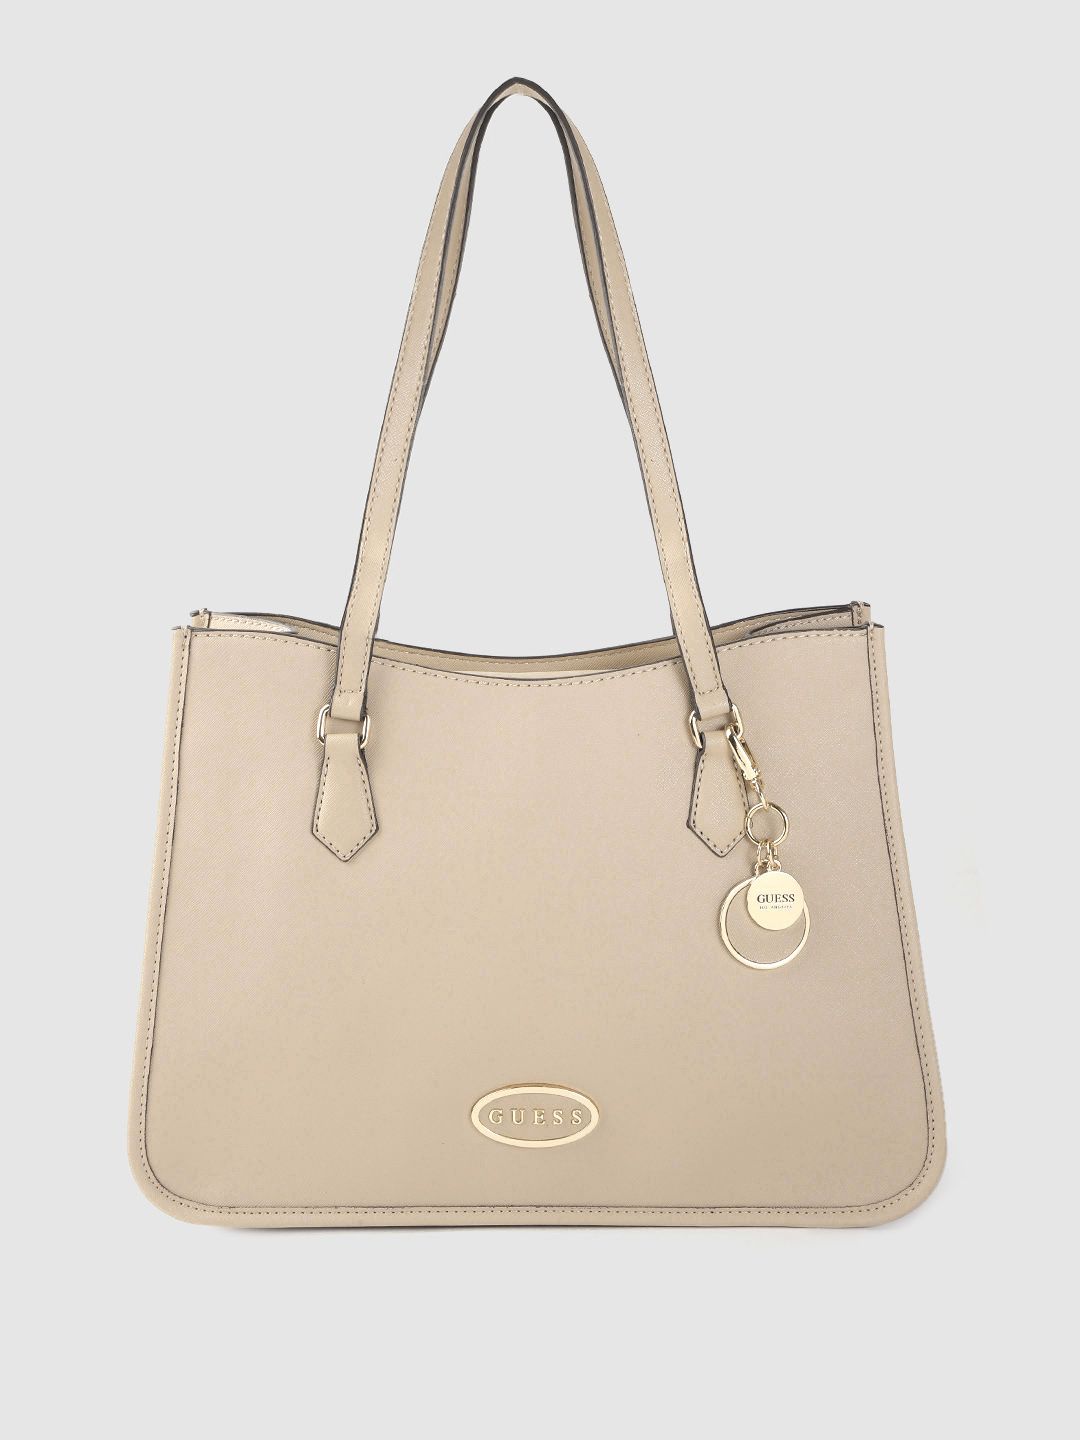 GUESS Women Beige Solid Structured Shoulder Bag Price in India